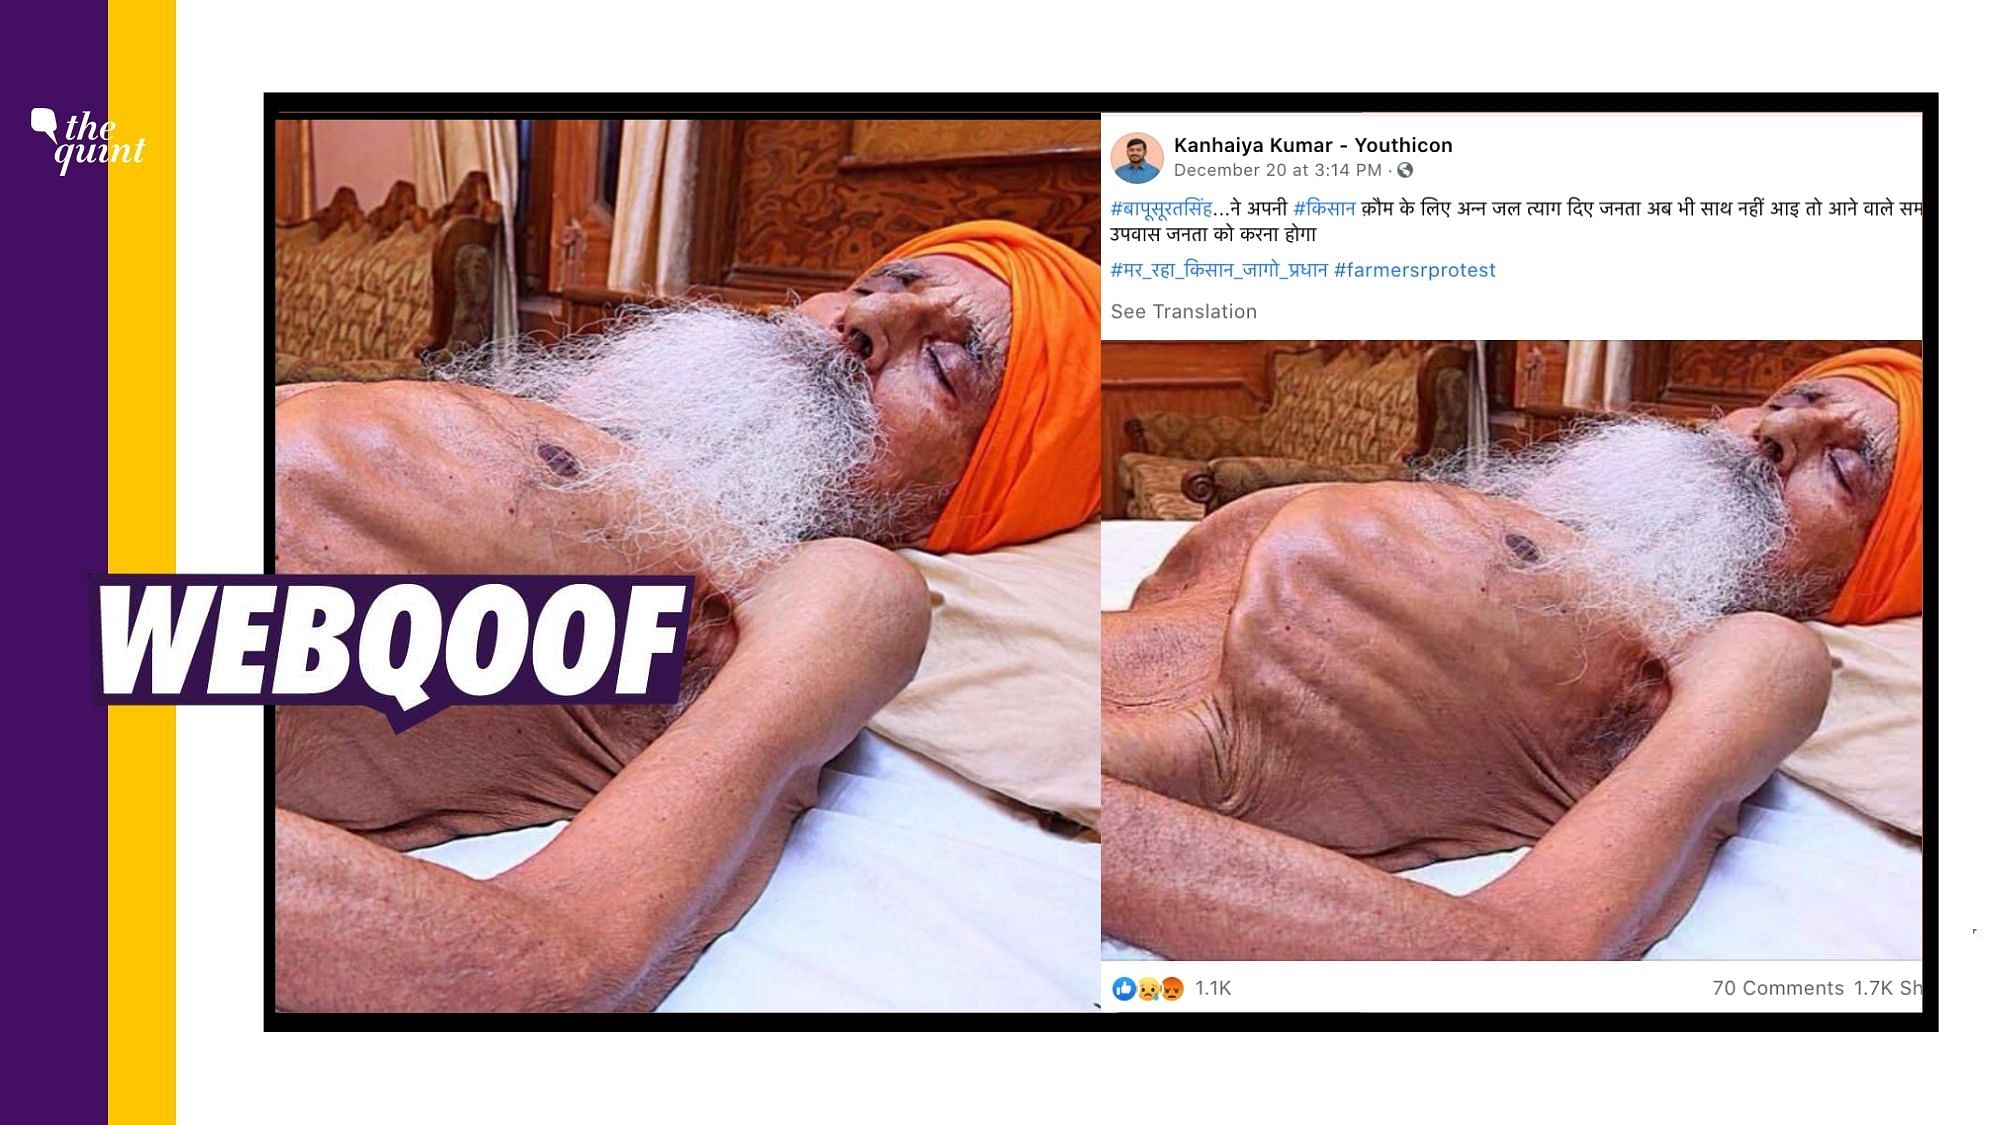 An old image of Bapu Surat Singh was revived to falsely claim that he is practicing hunger strike to support the ongoing farmers’ protest.